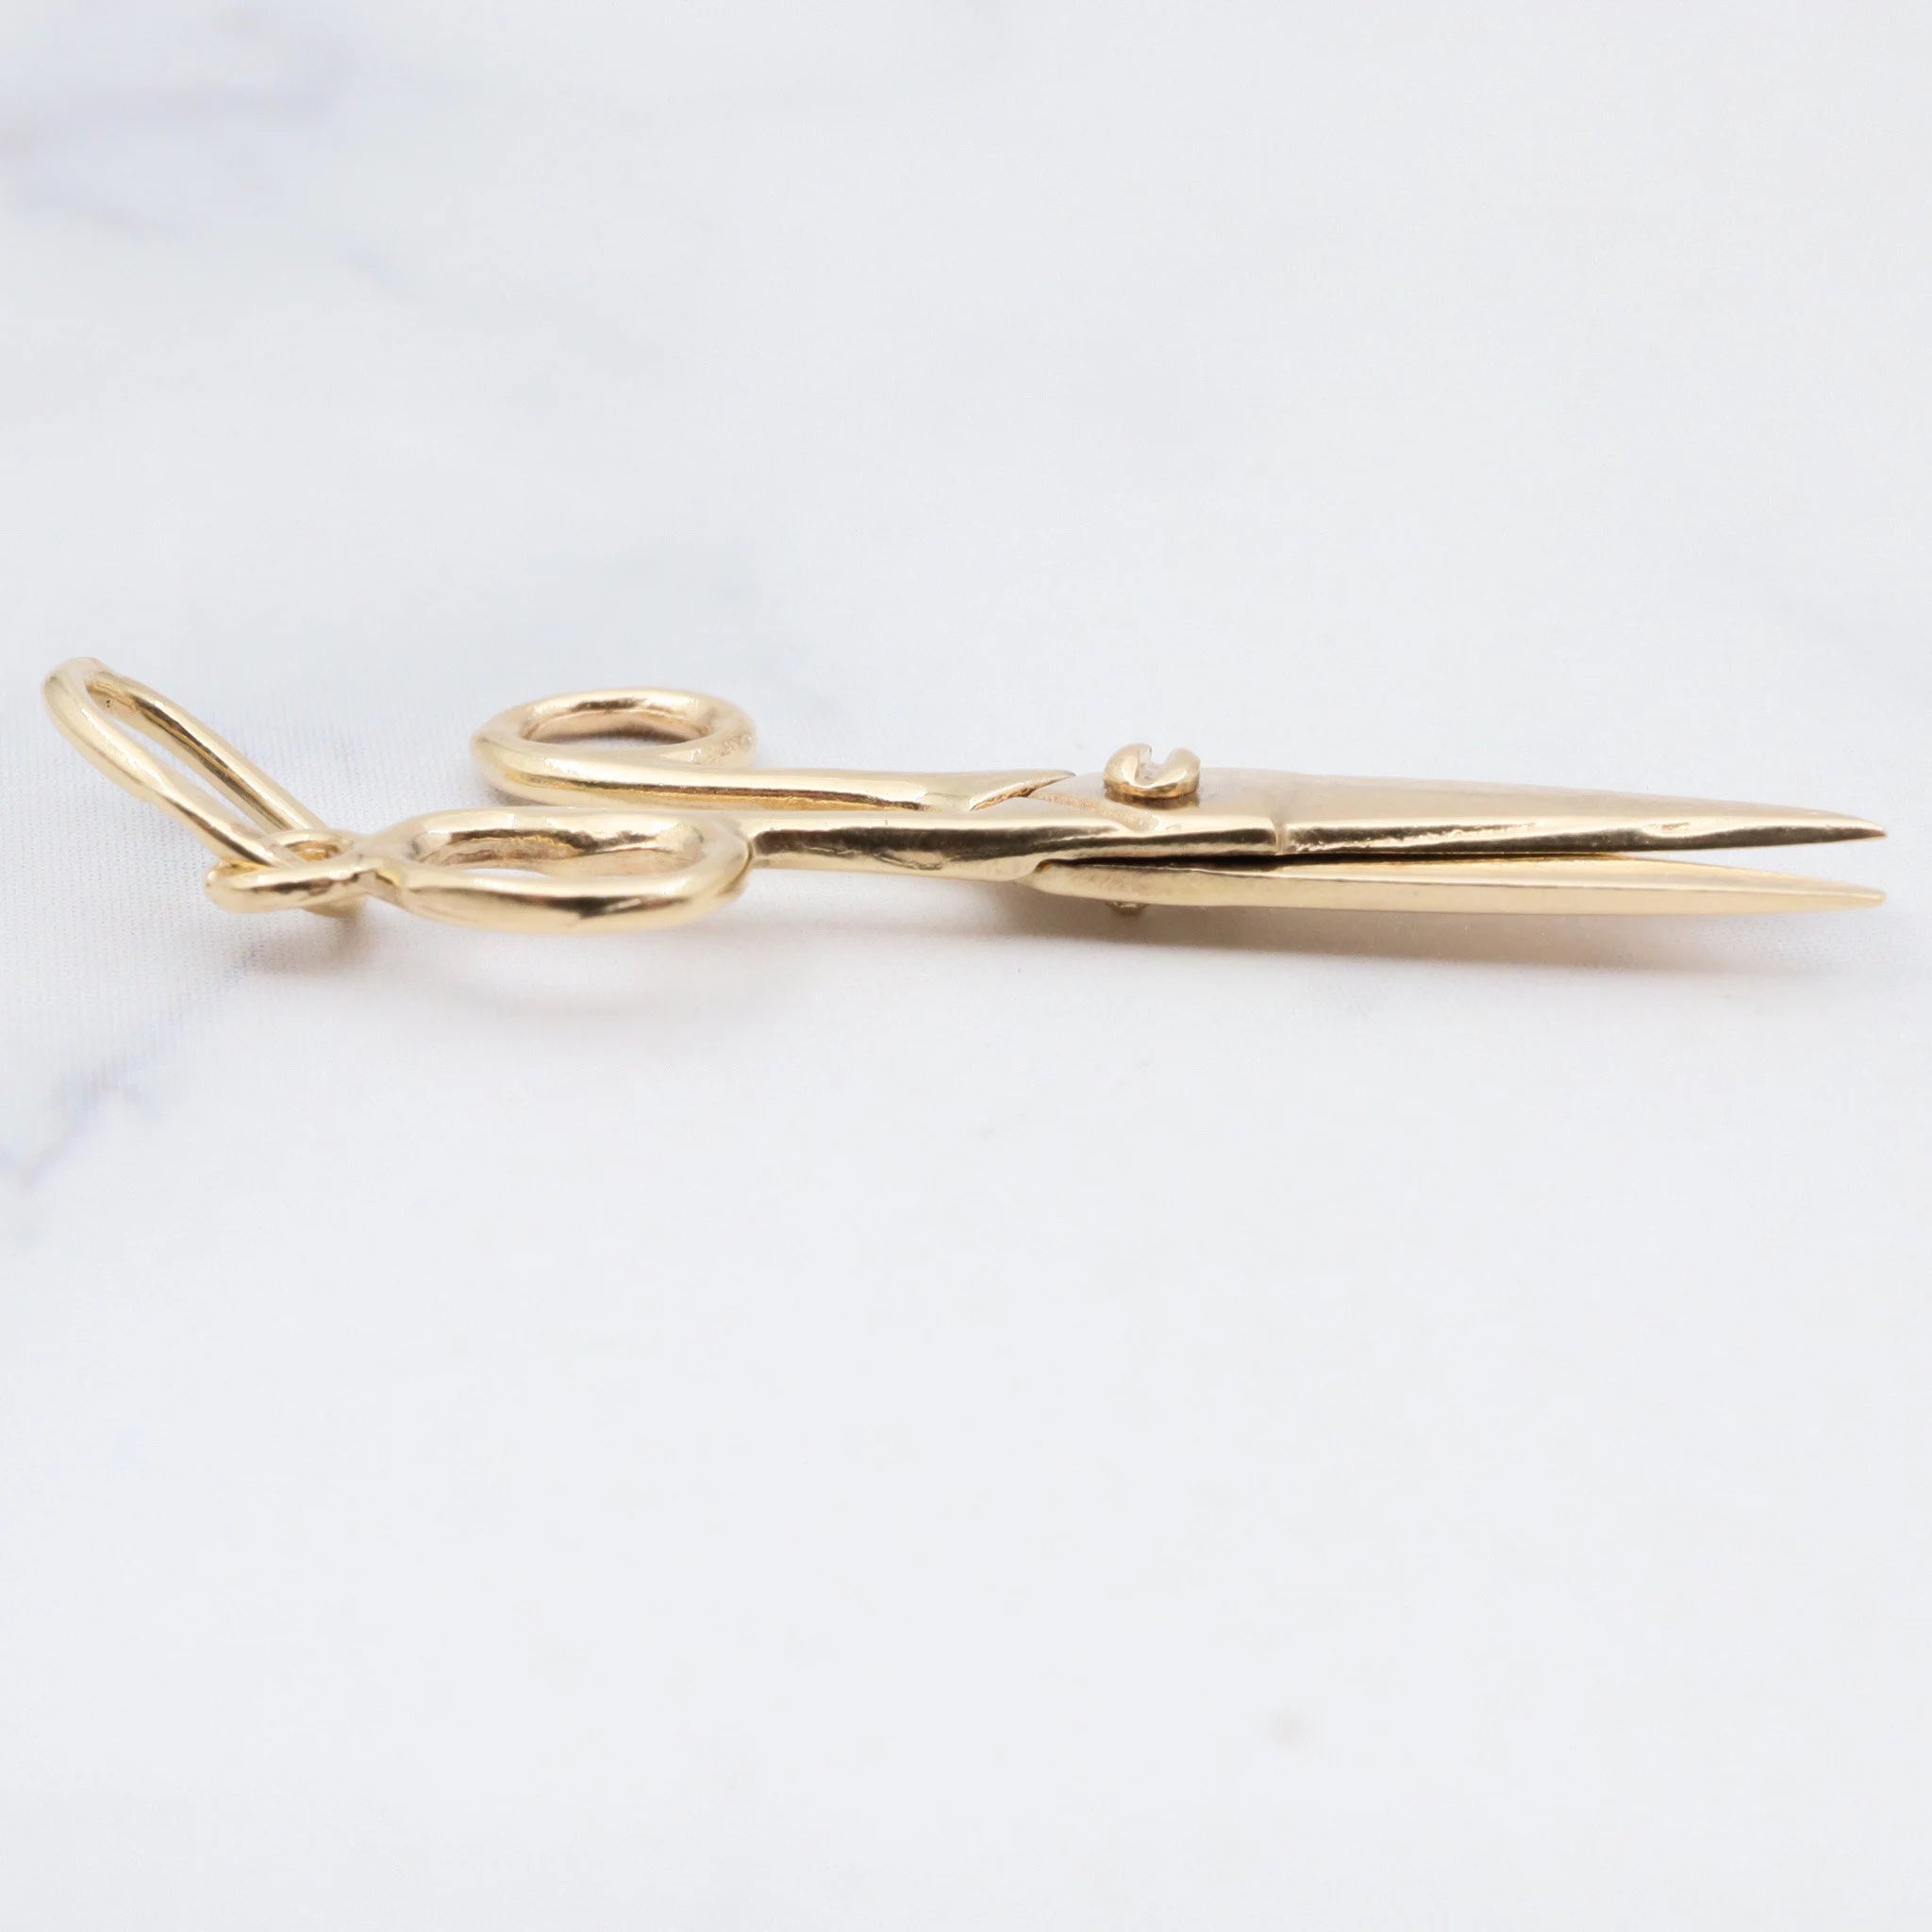 Vintage moving 14k gold sewing scissors charm